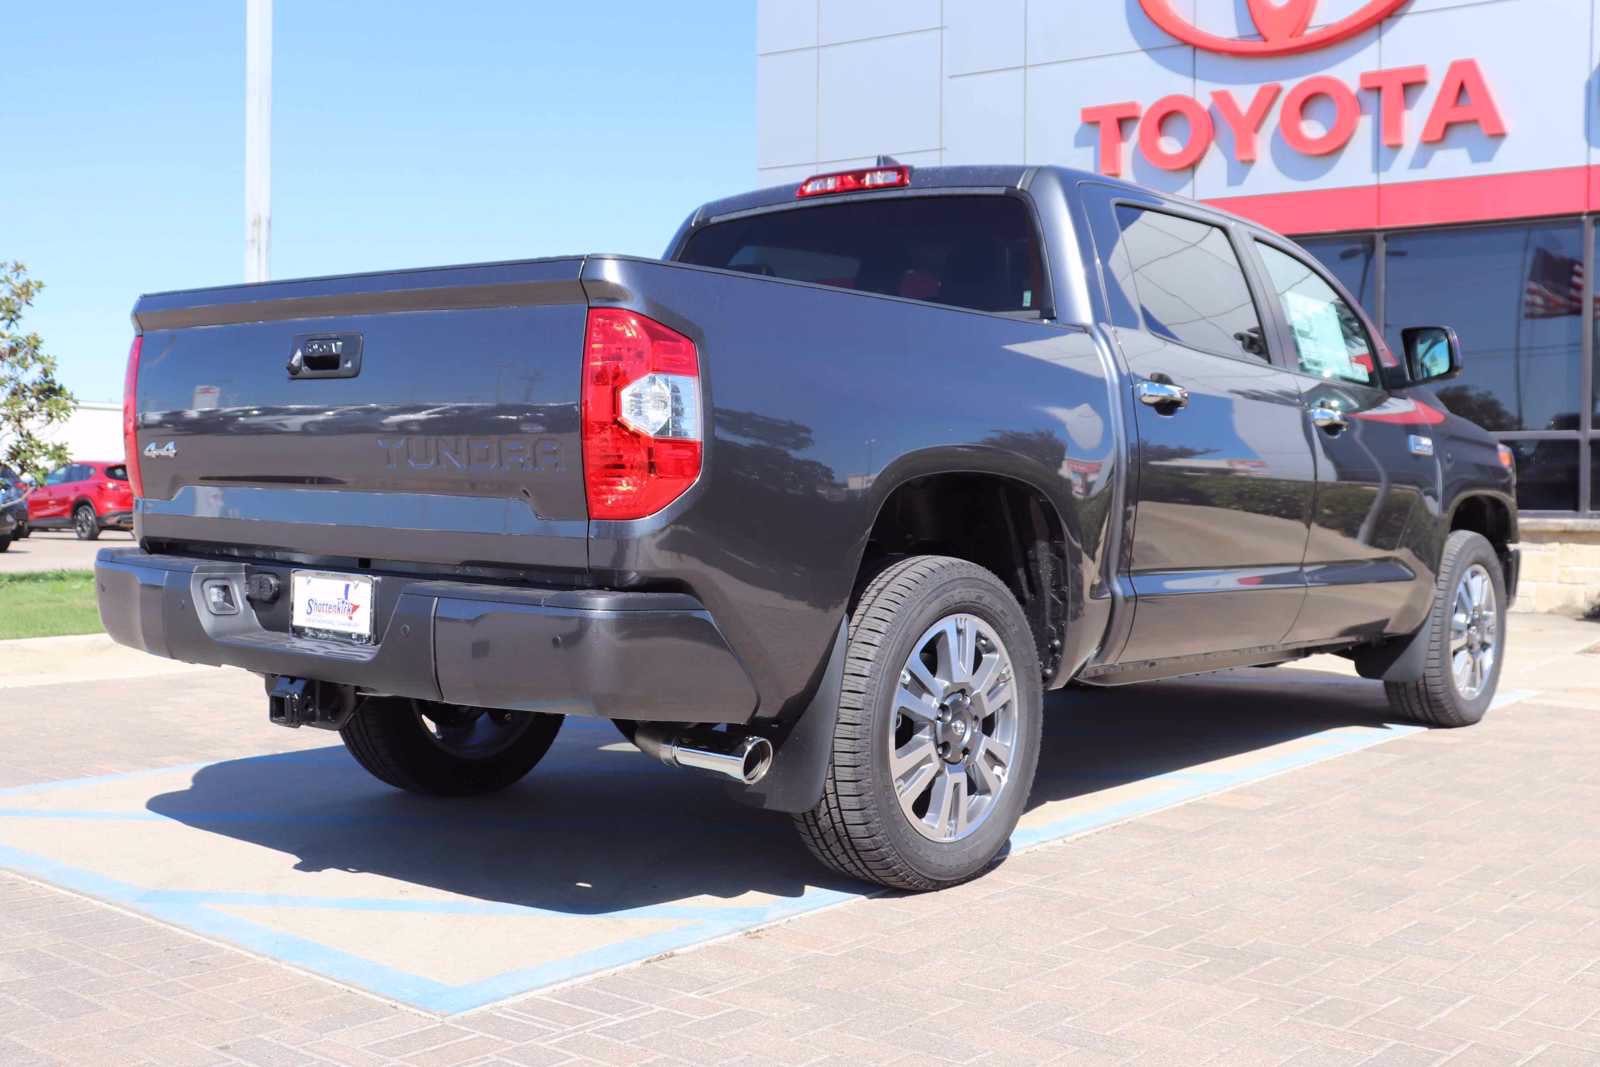 New 2021 Toyota Tundra 4WD Platinum Crew Cab Pickup in Weatherford #